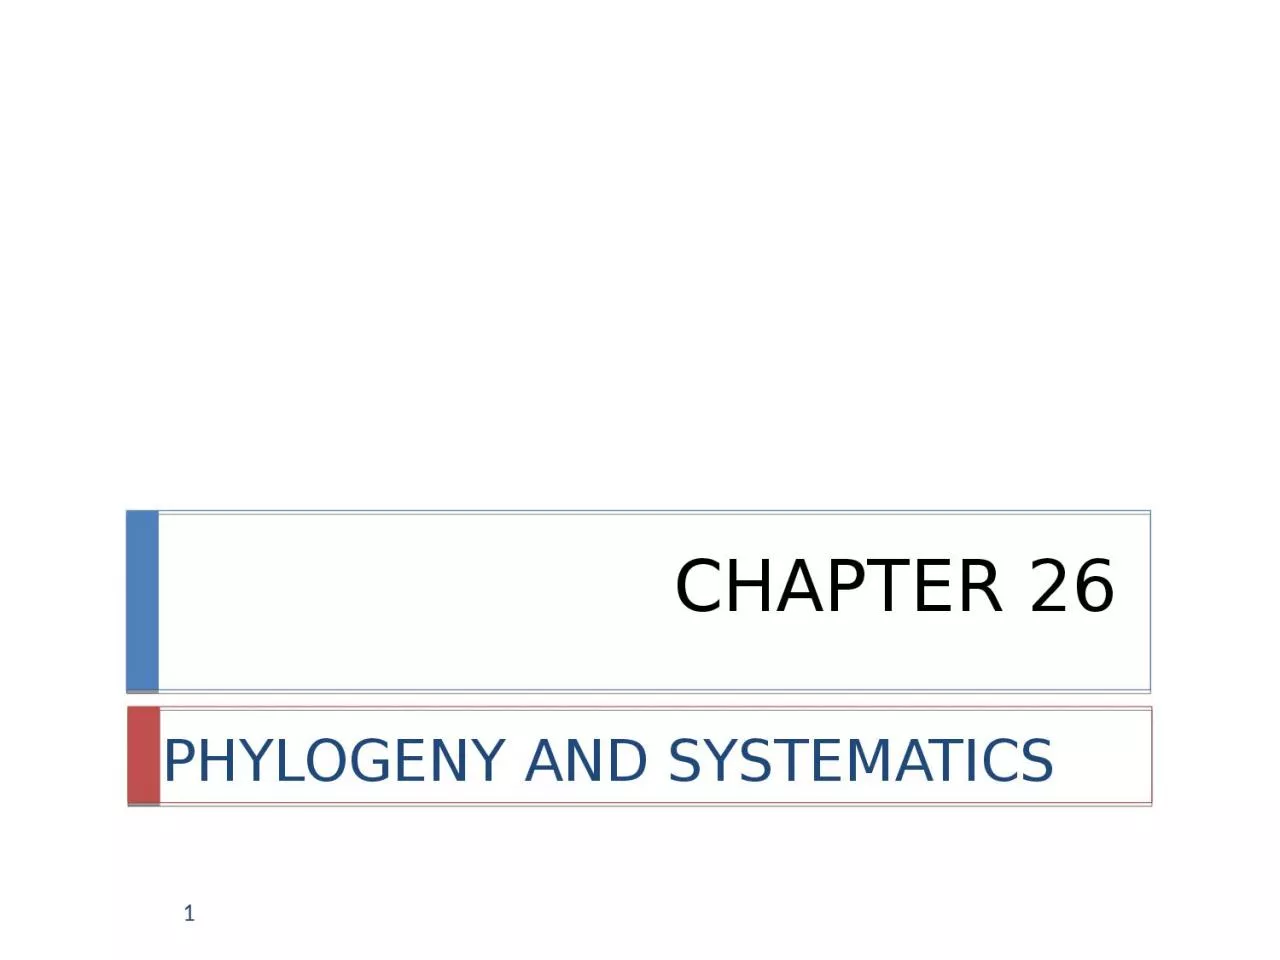 CHAPTER 26 PHYLOGENY AND SYSTEMATICS